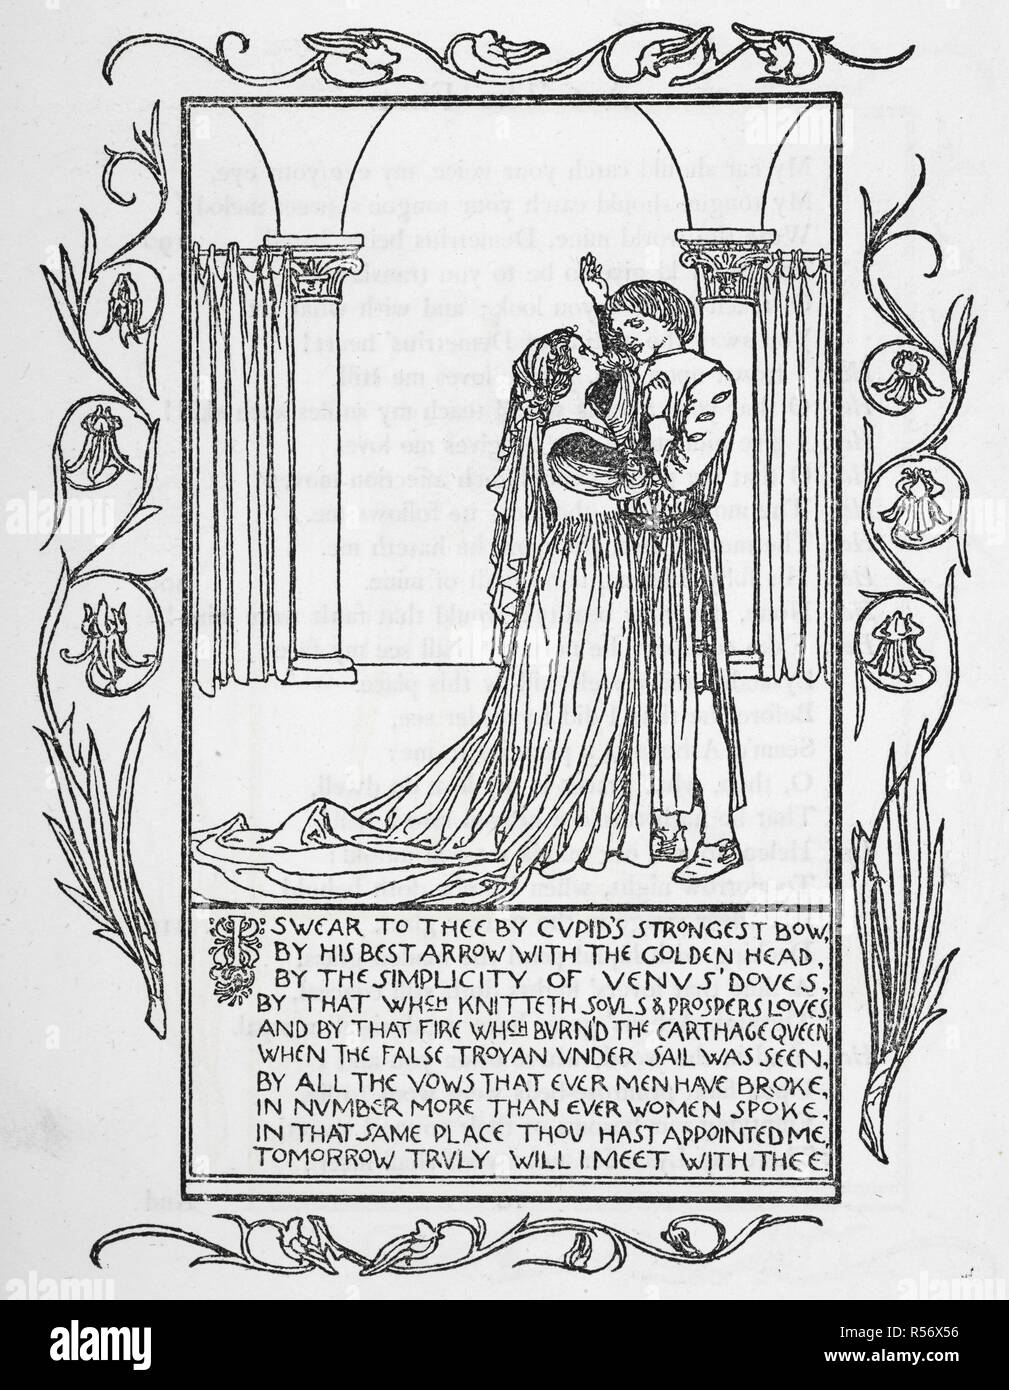 A man and a woman embracing. A Midsummer Night's Dream ... Illustrated by R. A. Bell. Edited with an introduction by Israel Gollancz. London : J. M. Dent & Co., 1895. Source: K.T.C.35.a.7, plate 9. Language: English. Author: SHAKESPEARE, WILLIAM. Stock Photo